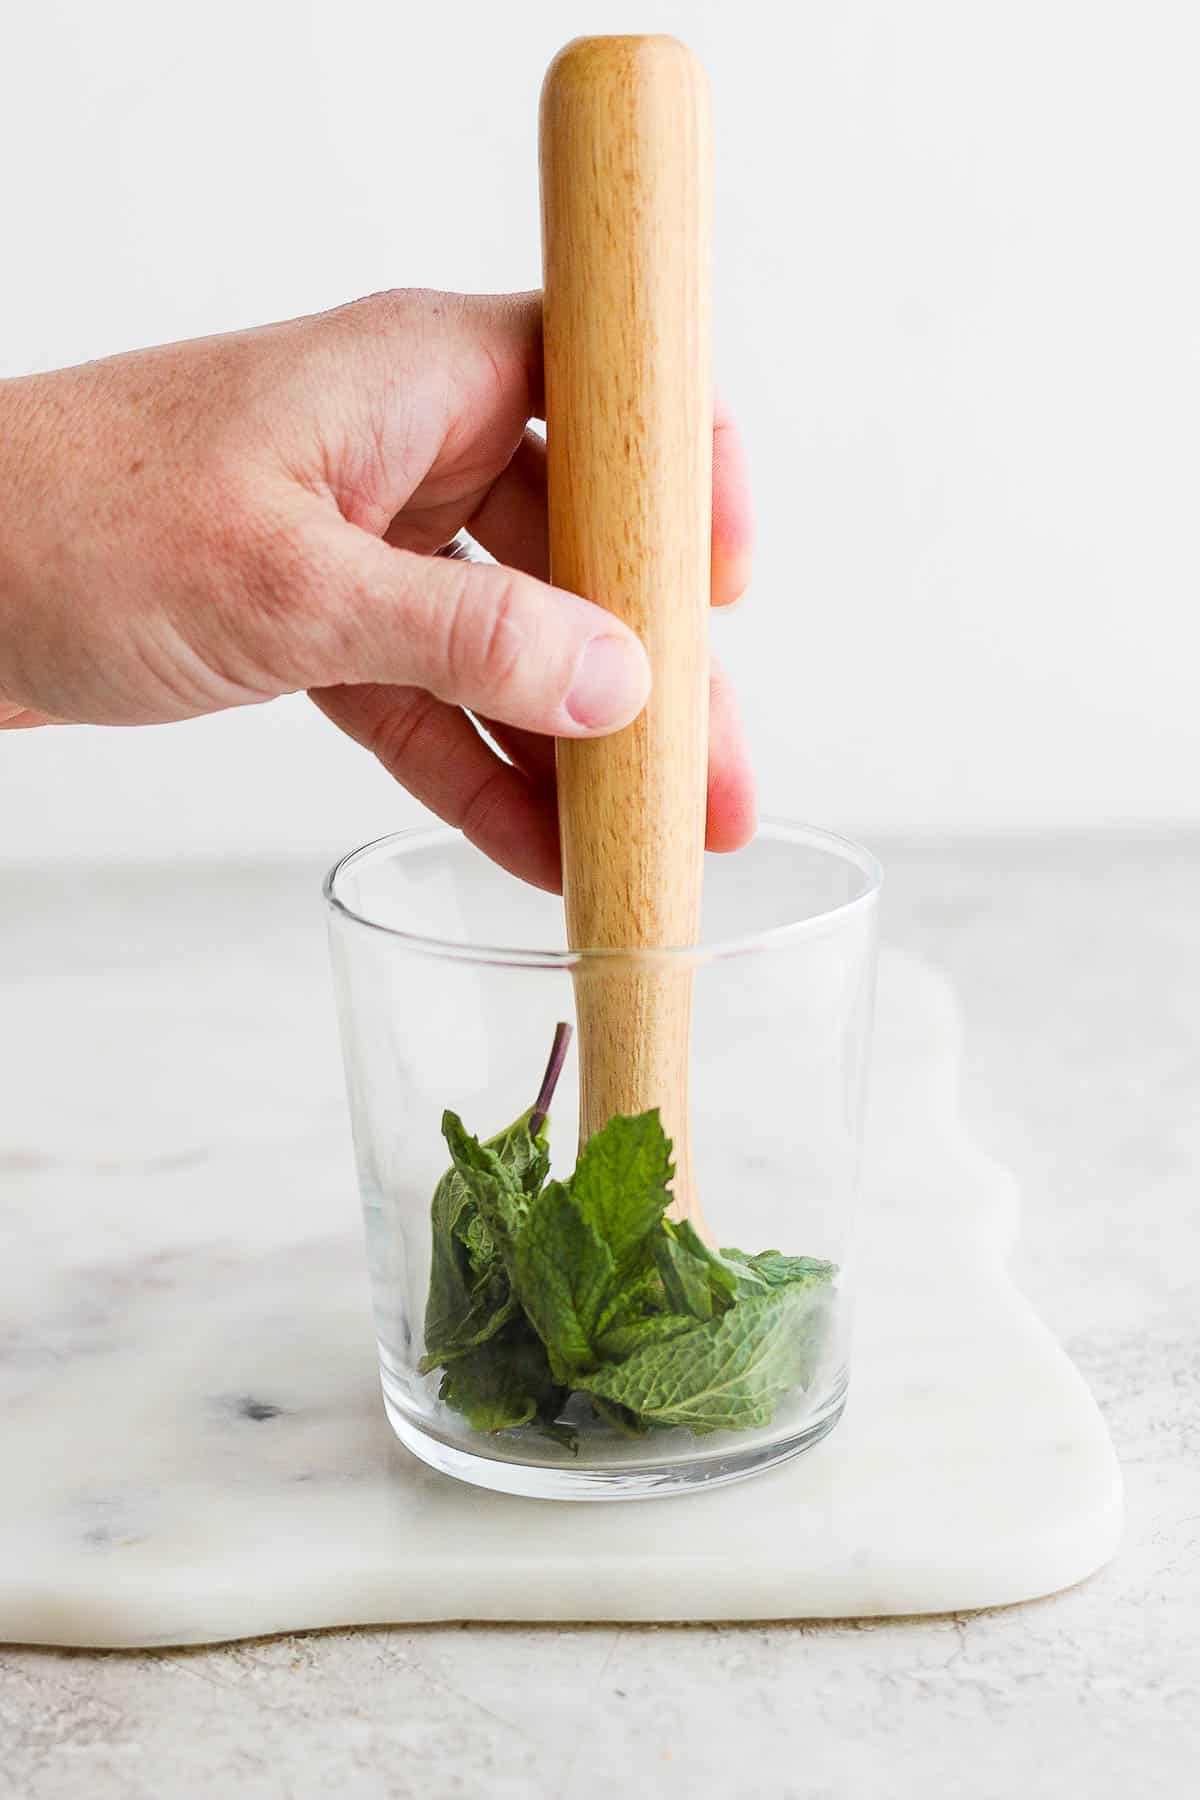 Mint leaves being muddled in the bottom of a clear glass.